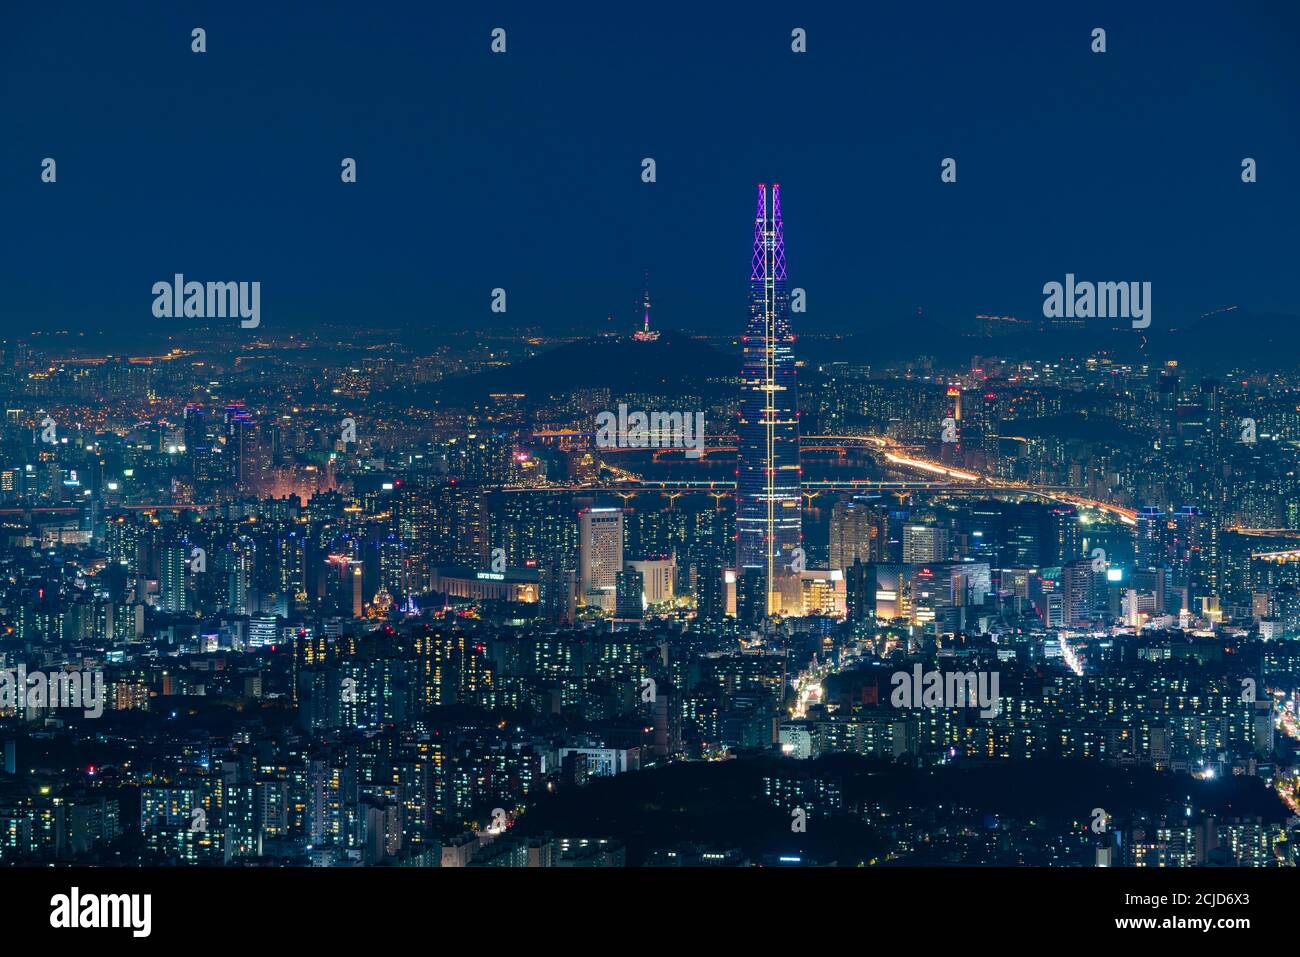 Lotte World Tower and Seoul city at night Stock Photo